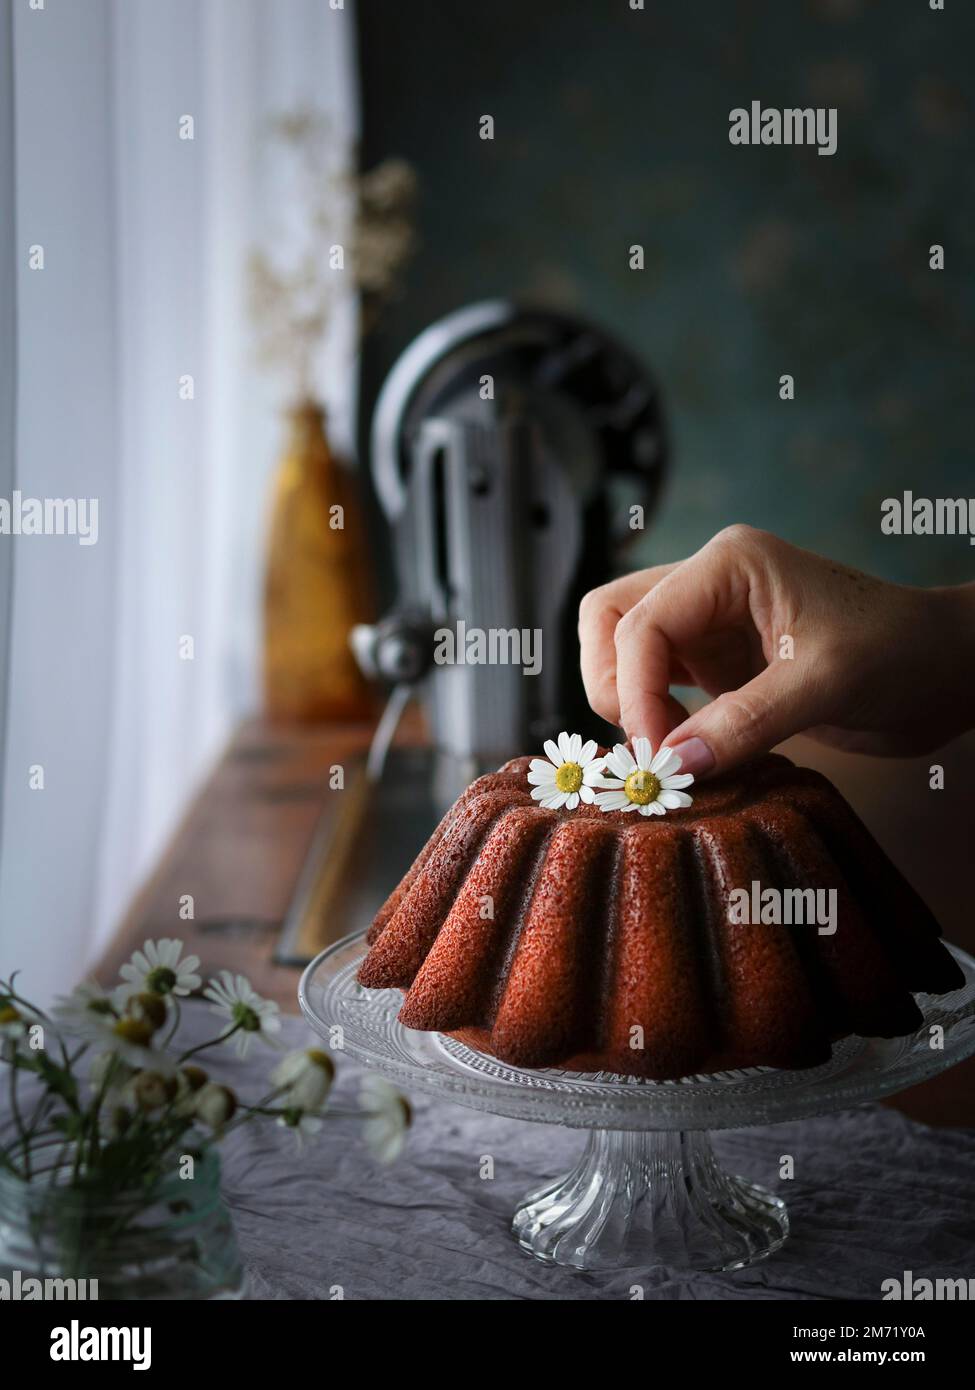 Citrus bundt cake decorated with flowers on a glass stand next to the window Stock Photo